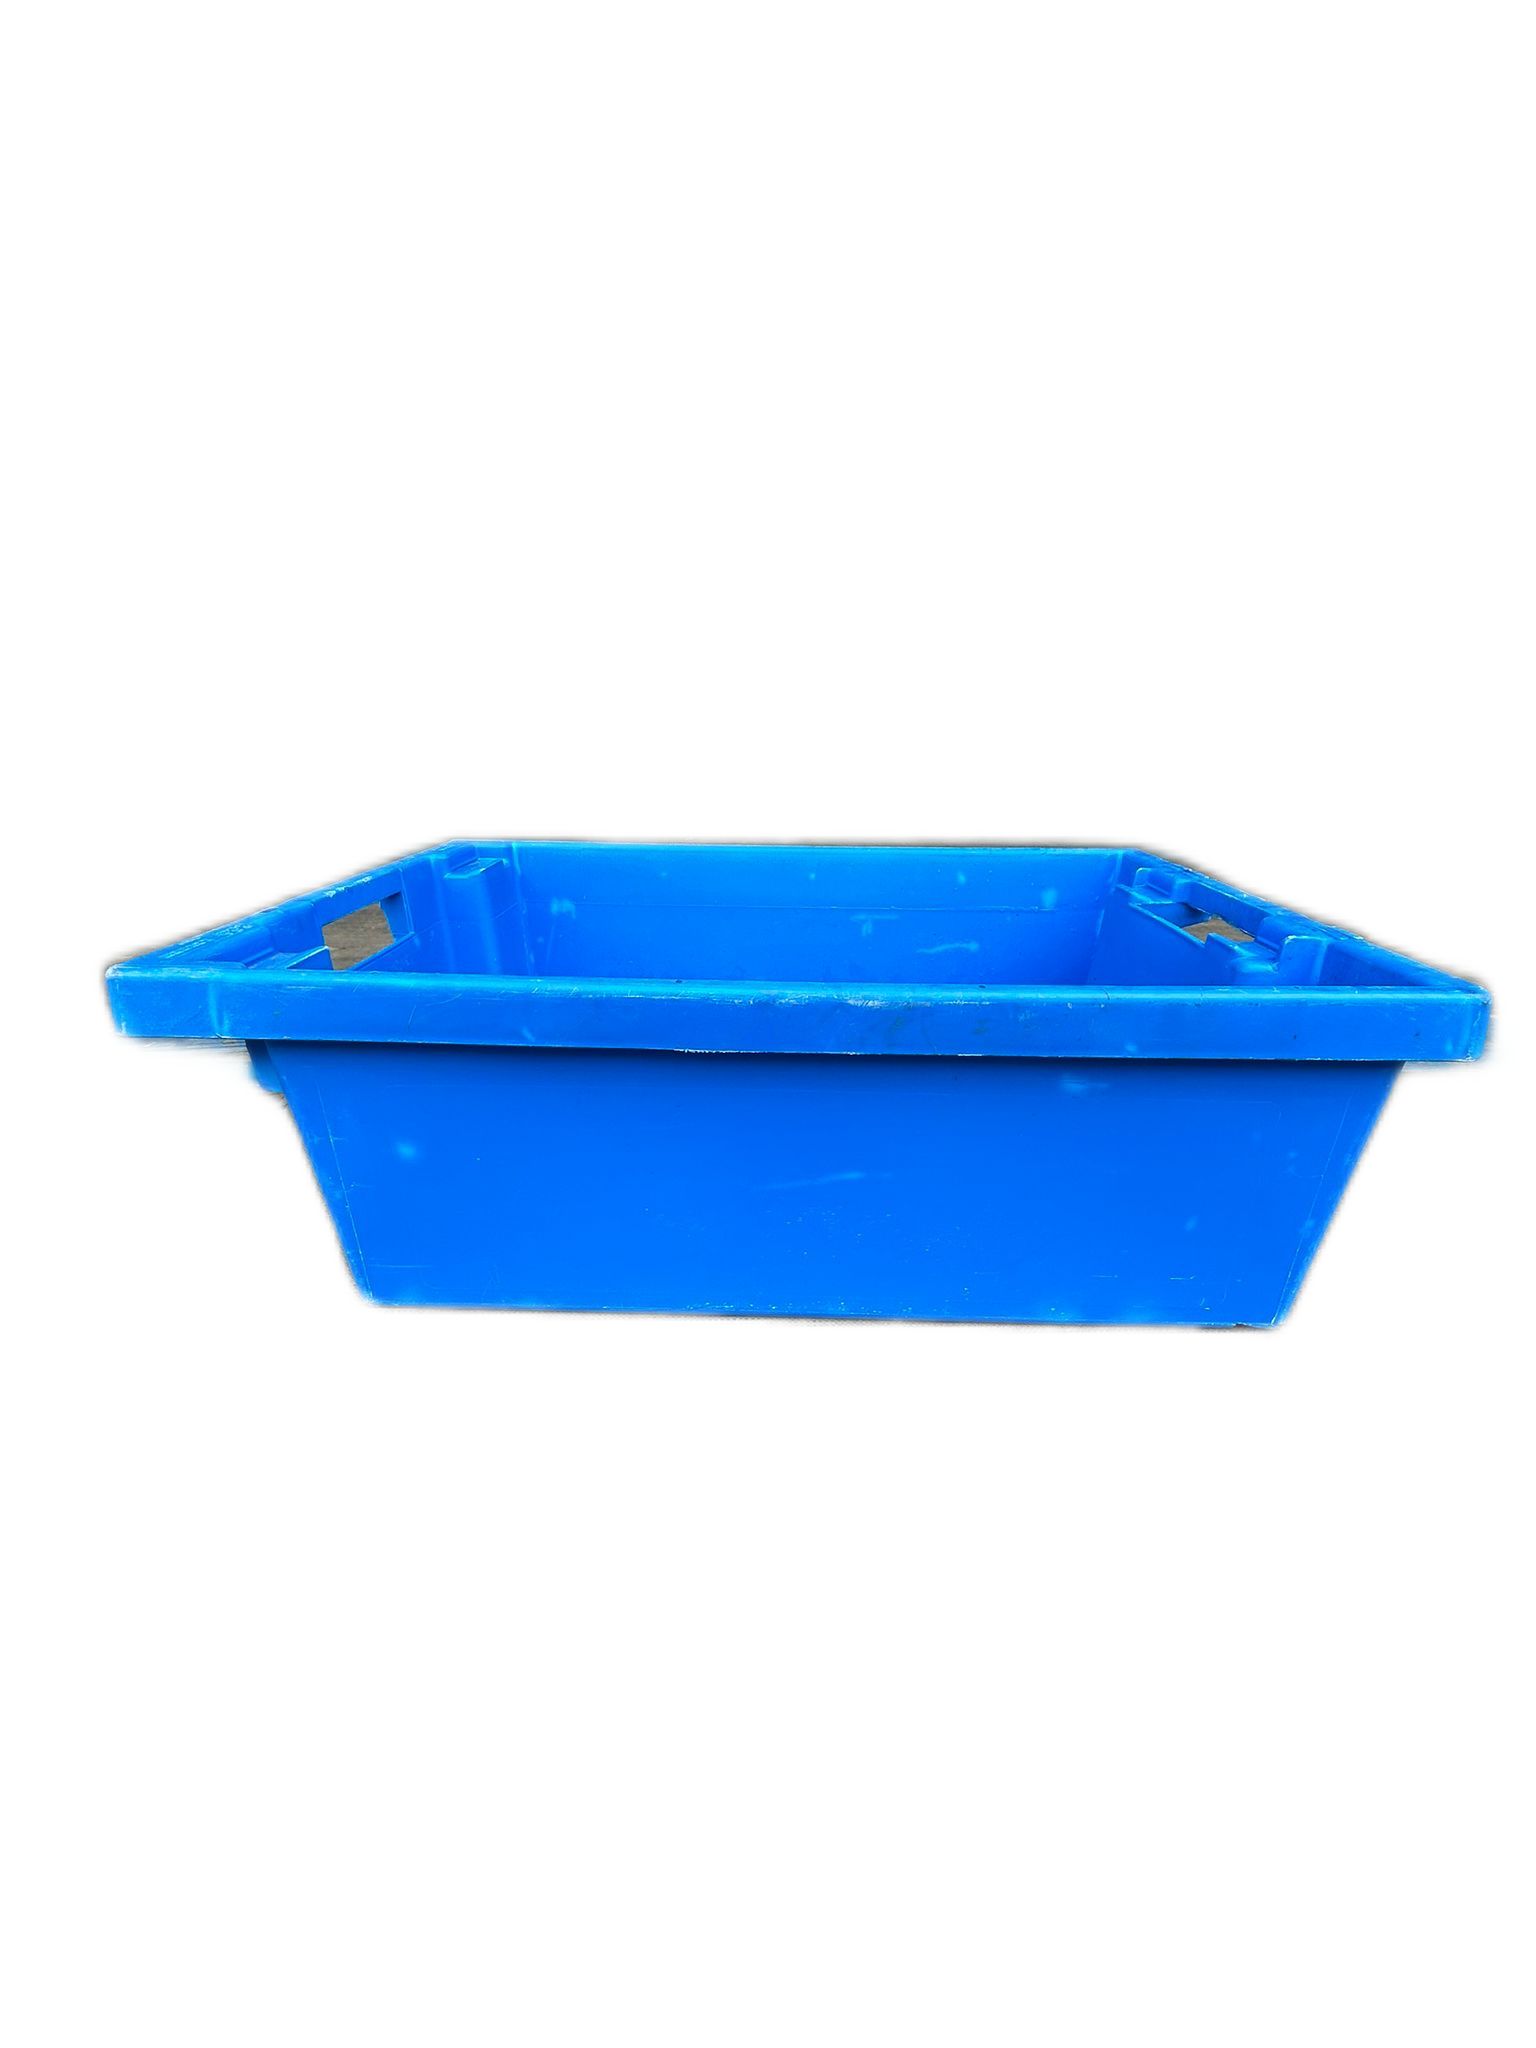 UK Suppliers Of 600x400x100 Bale Arm Crate 16Ltr - Blue Arms (Pk of 14) For Commercial Industry